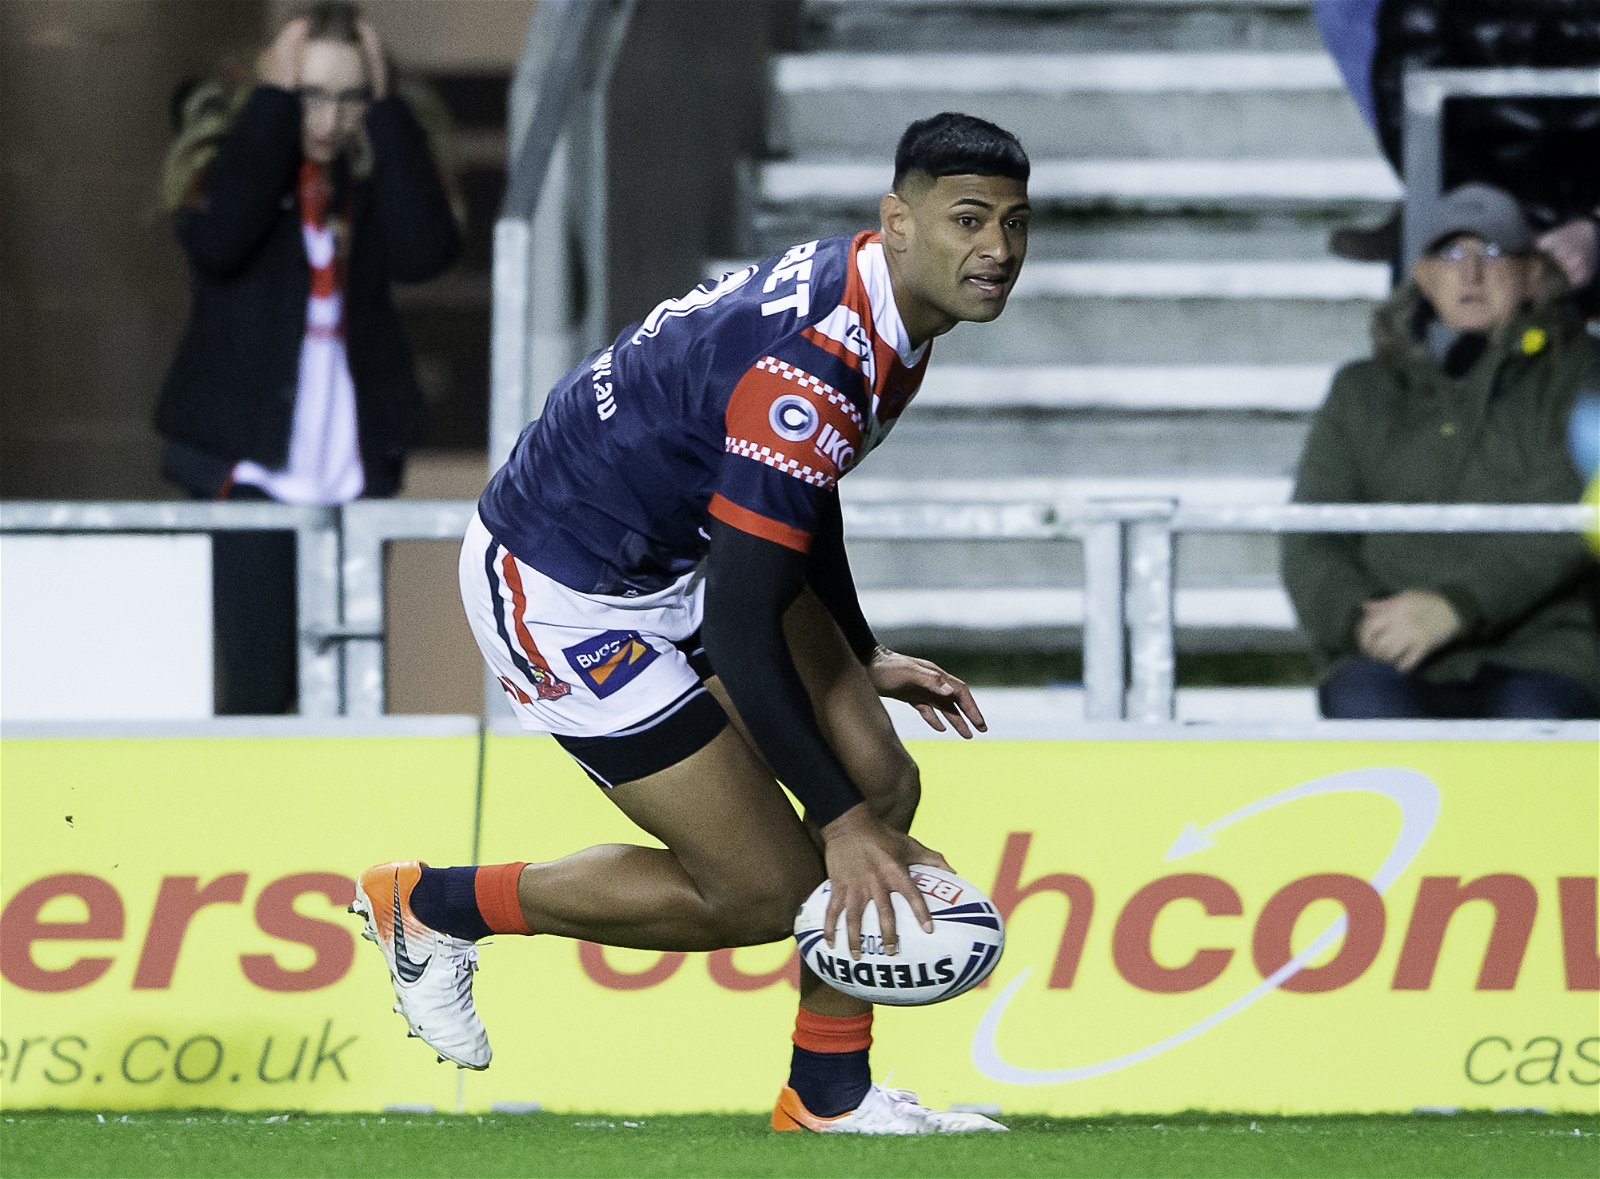 Daniel Tupou has previously been linked with St Helens